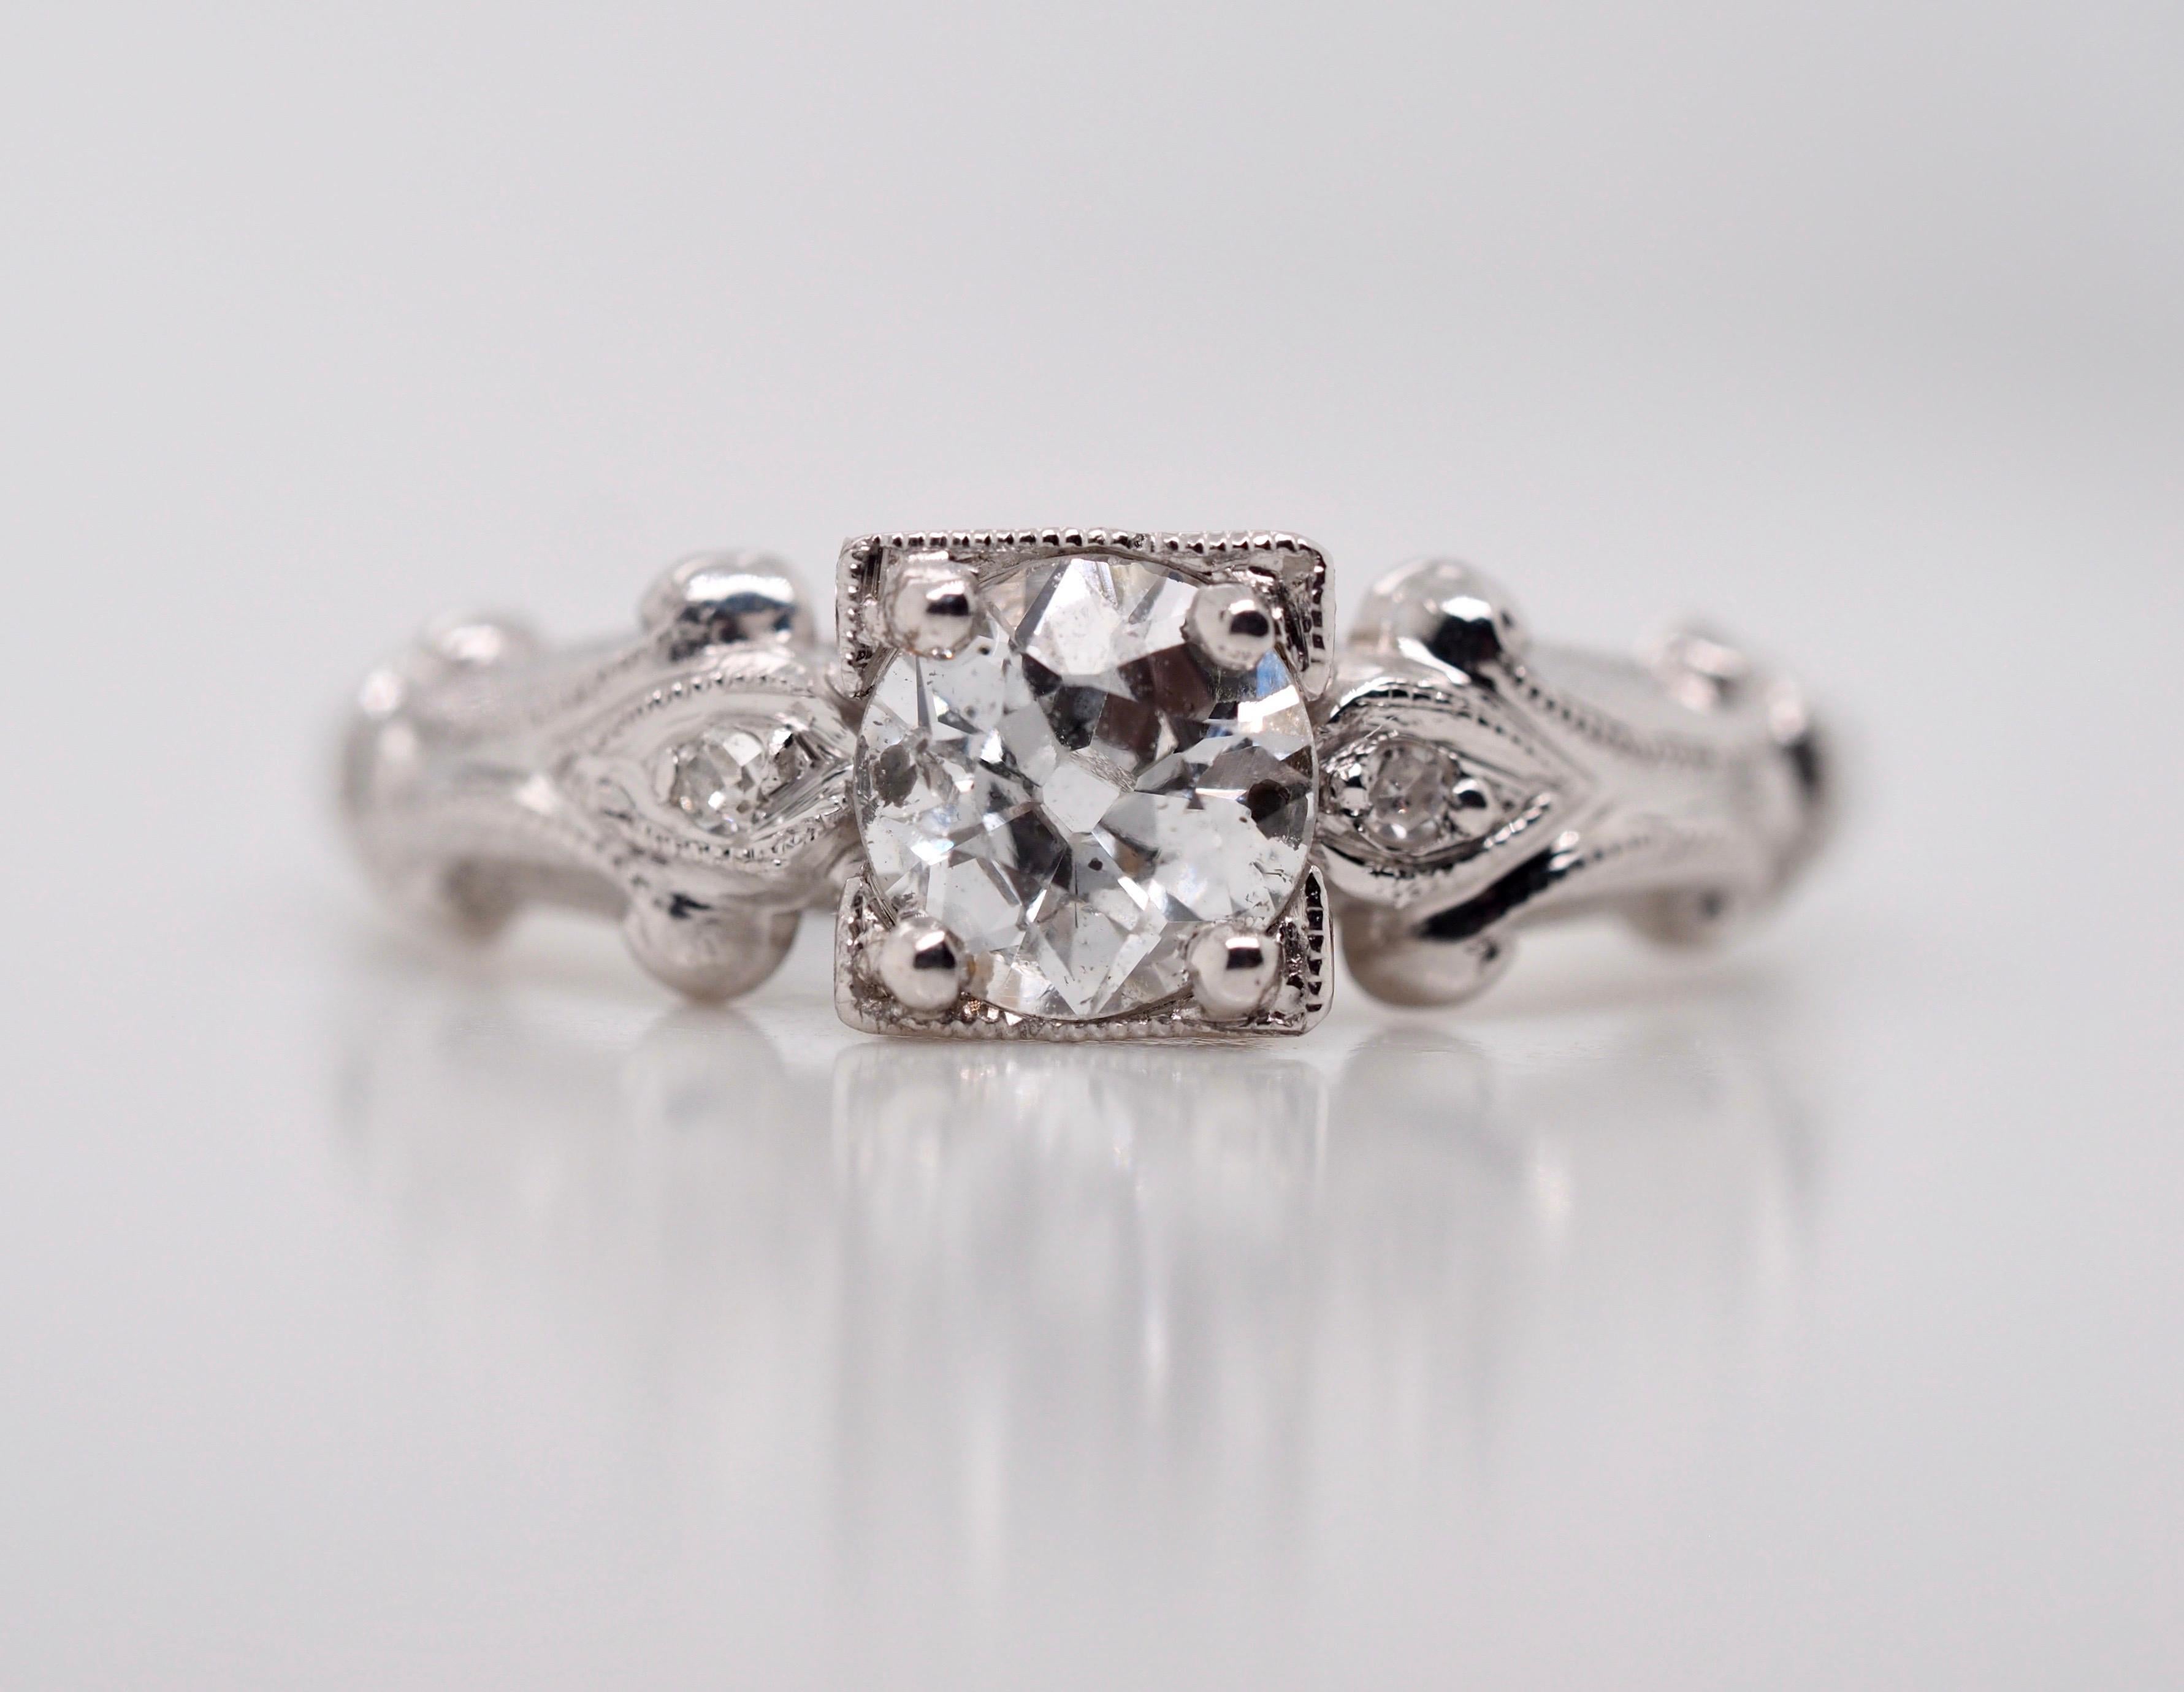 This gorgeous 14 karat white gold Art Deco vintage engagement ring features an Old European Cut Diamond set in four prongs, weighing 0.44 carats, I1 in clarity I in color. Two old mine cut diamonds are accenting the sides with adorned swirls flowing